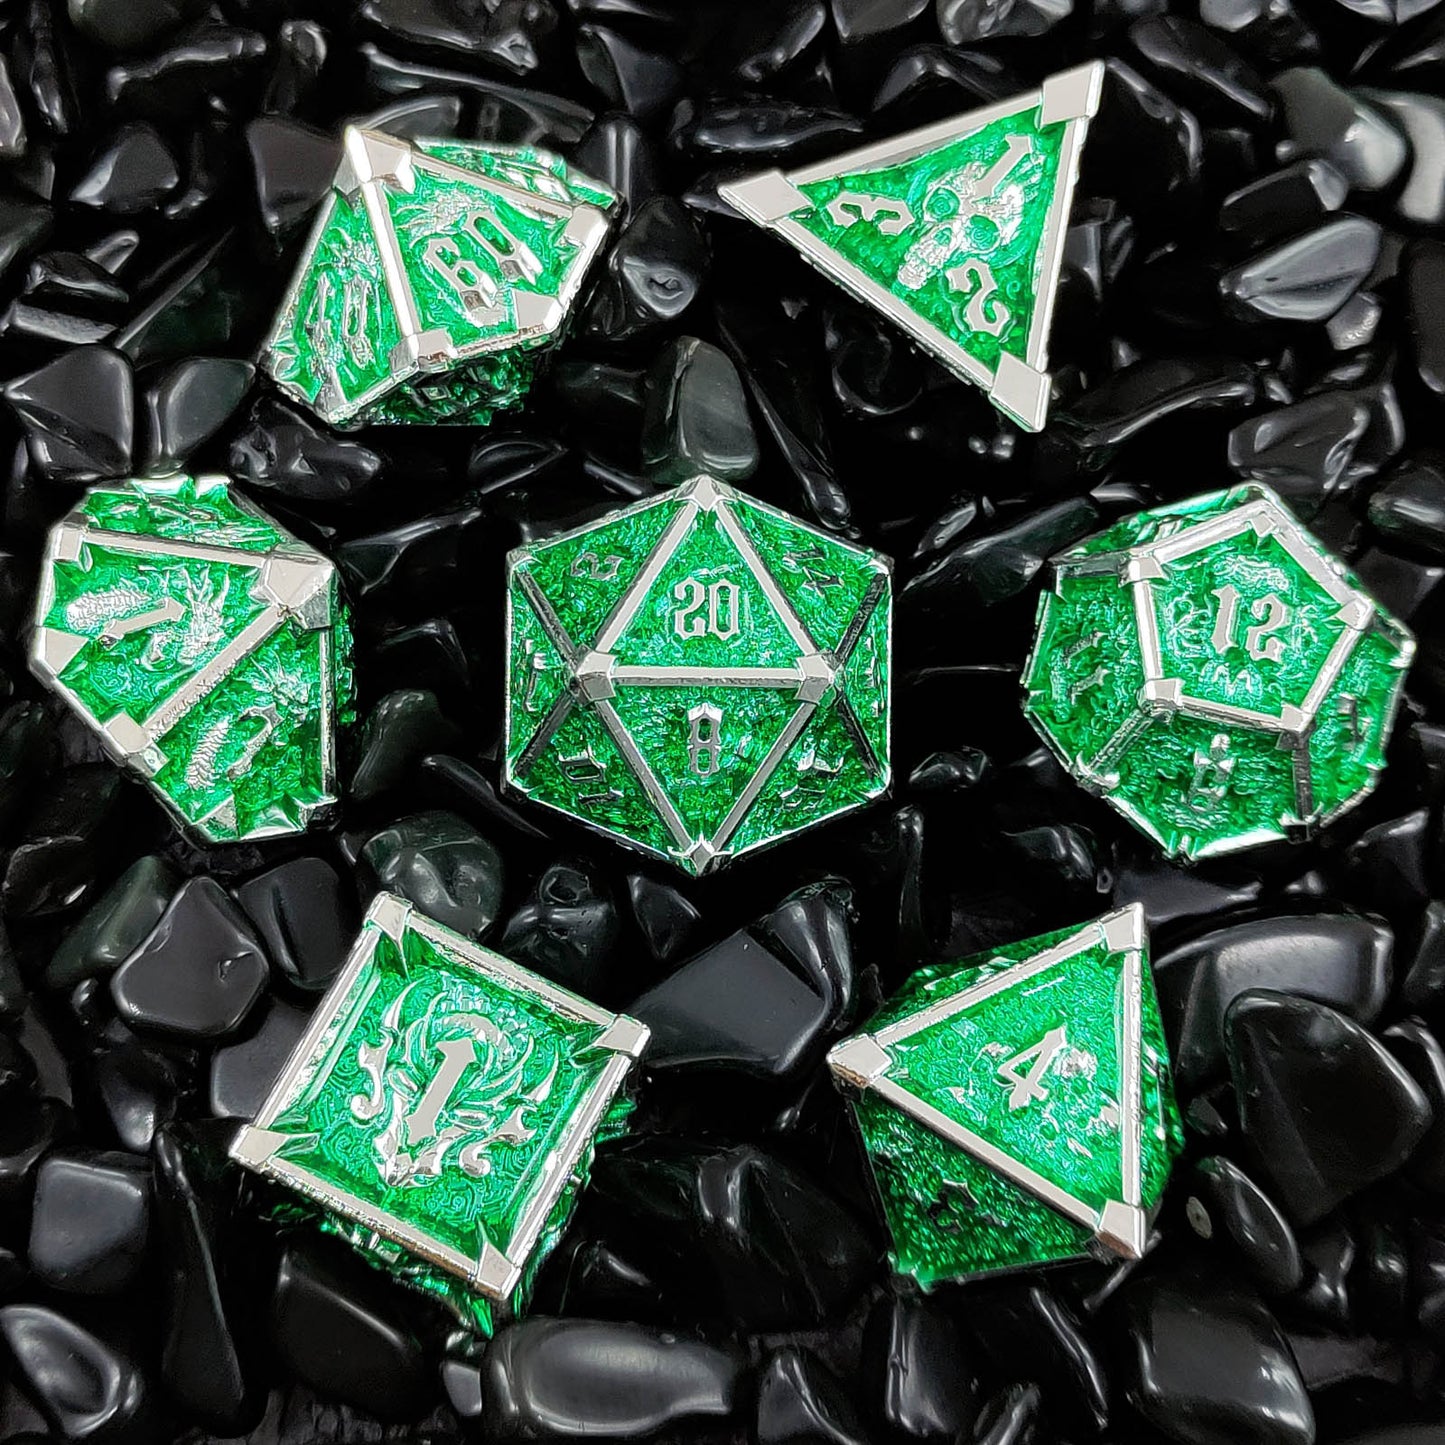 Metal Solid Star angle Dice Set, Silver Green